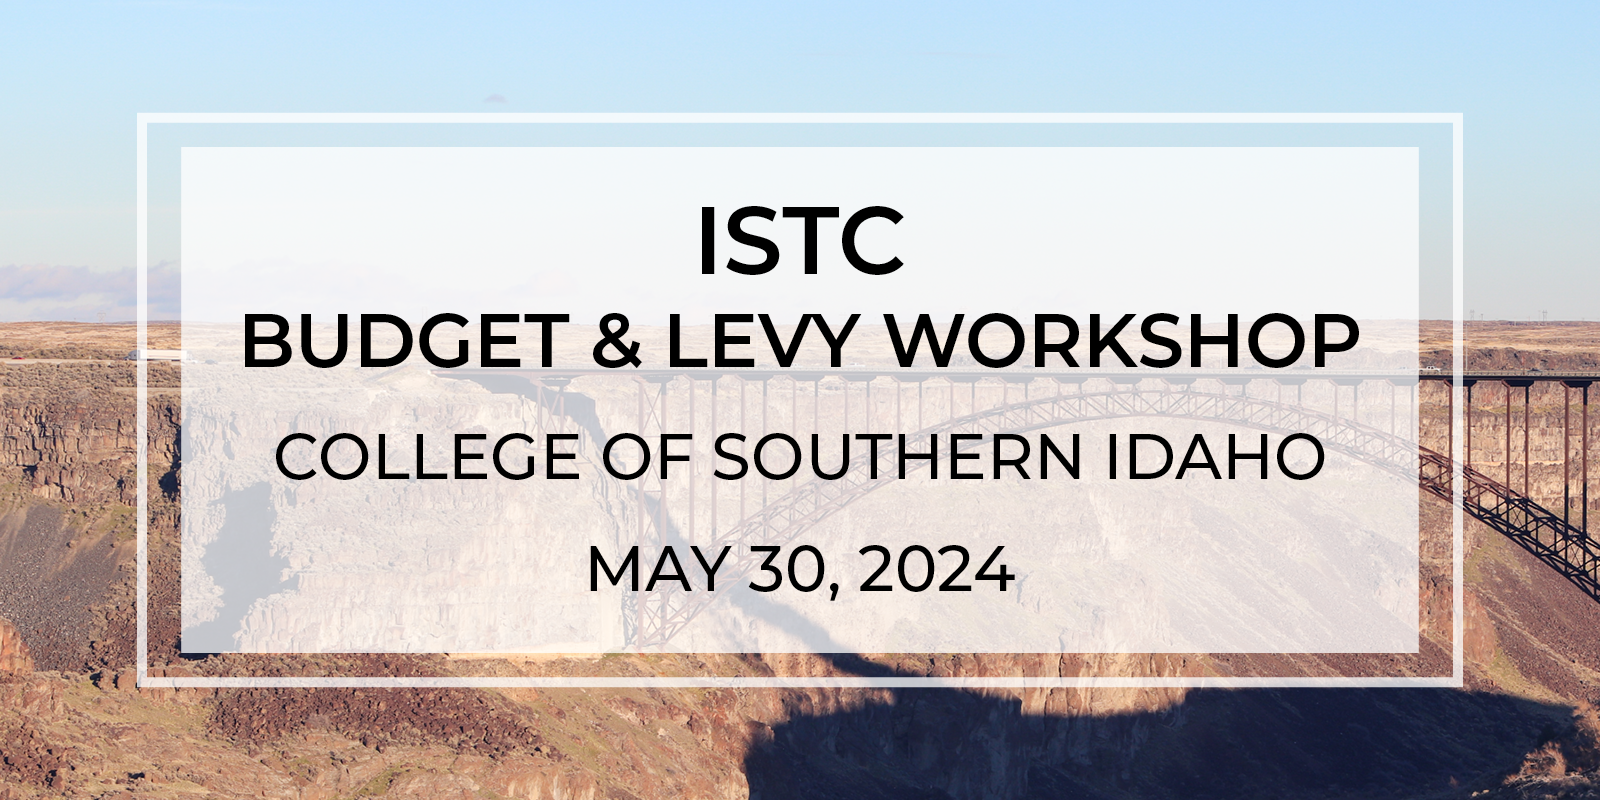 ISTC 2024 Budget and Levy Workshop: Twin Falls